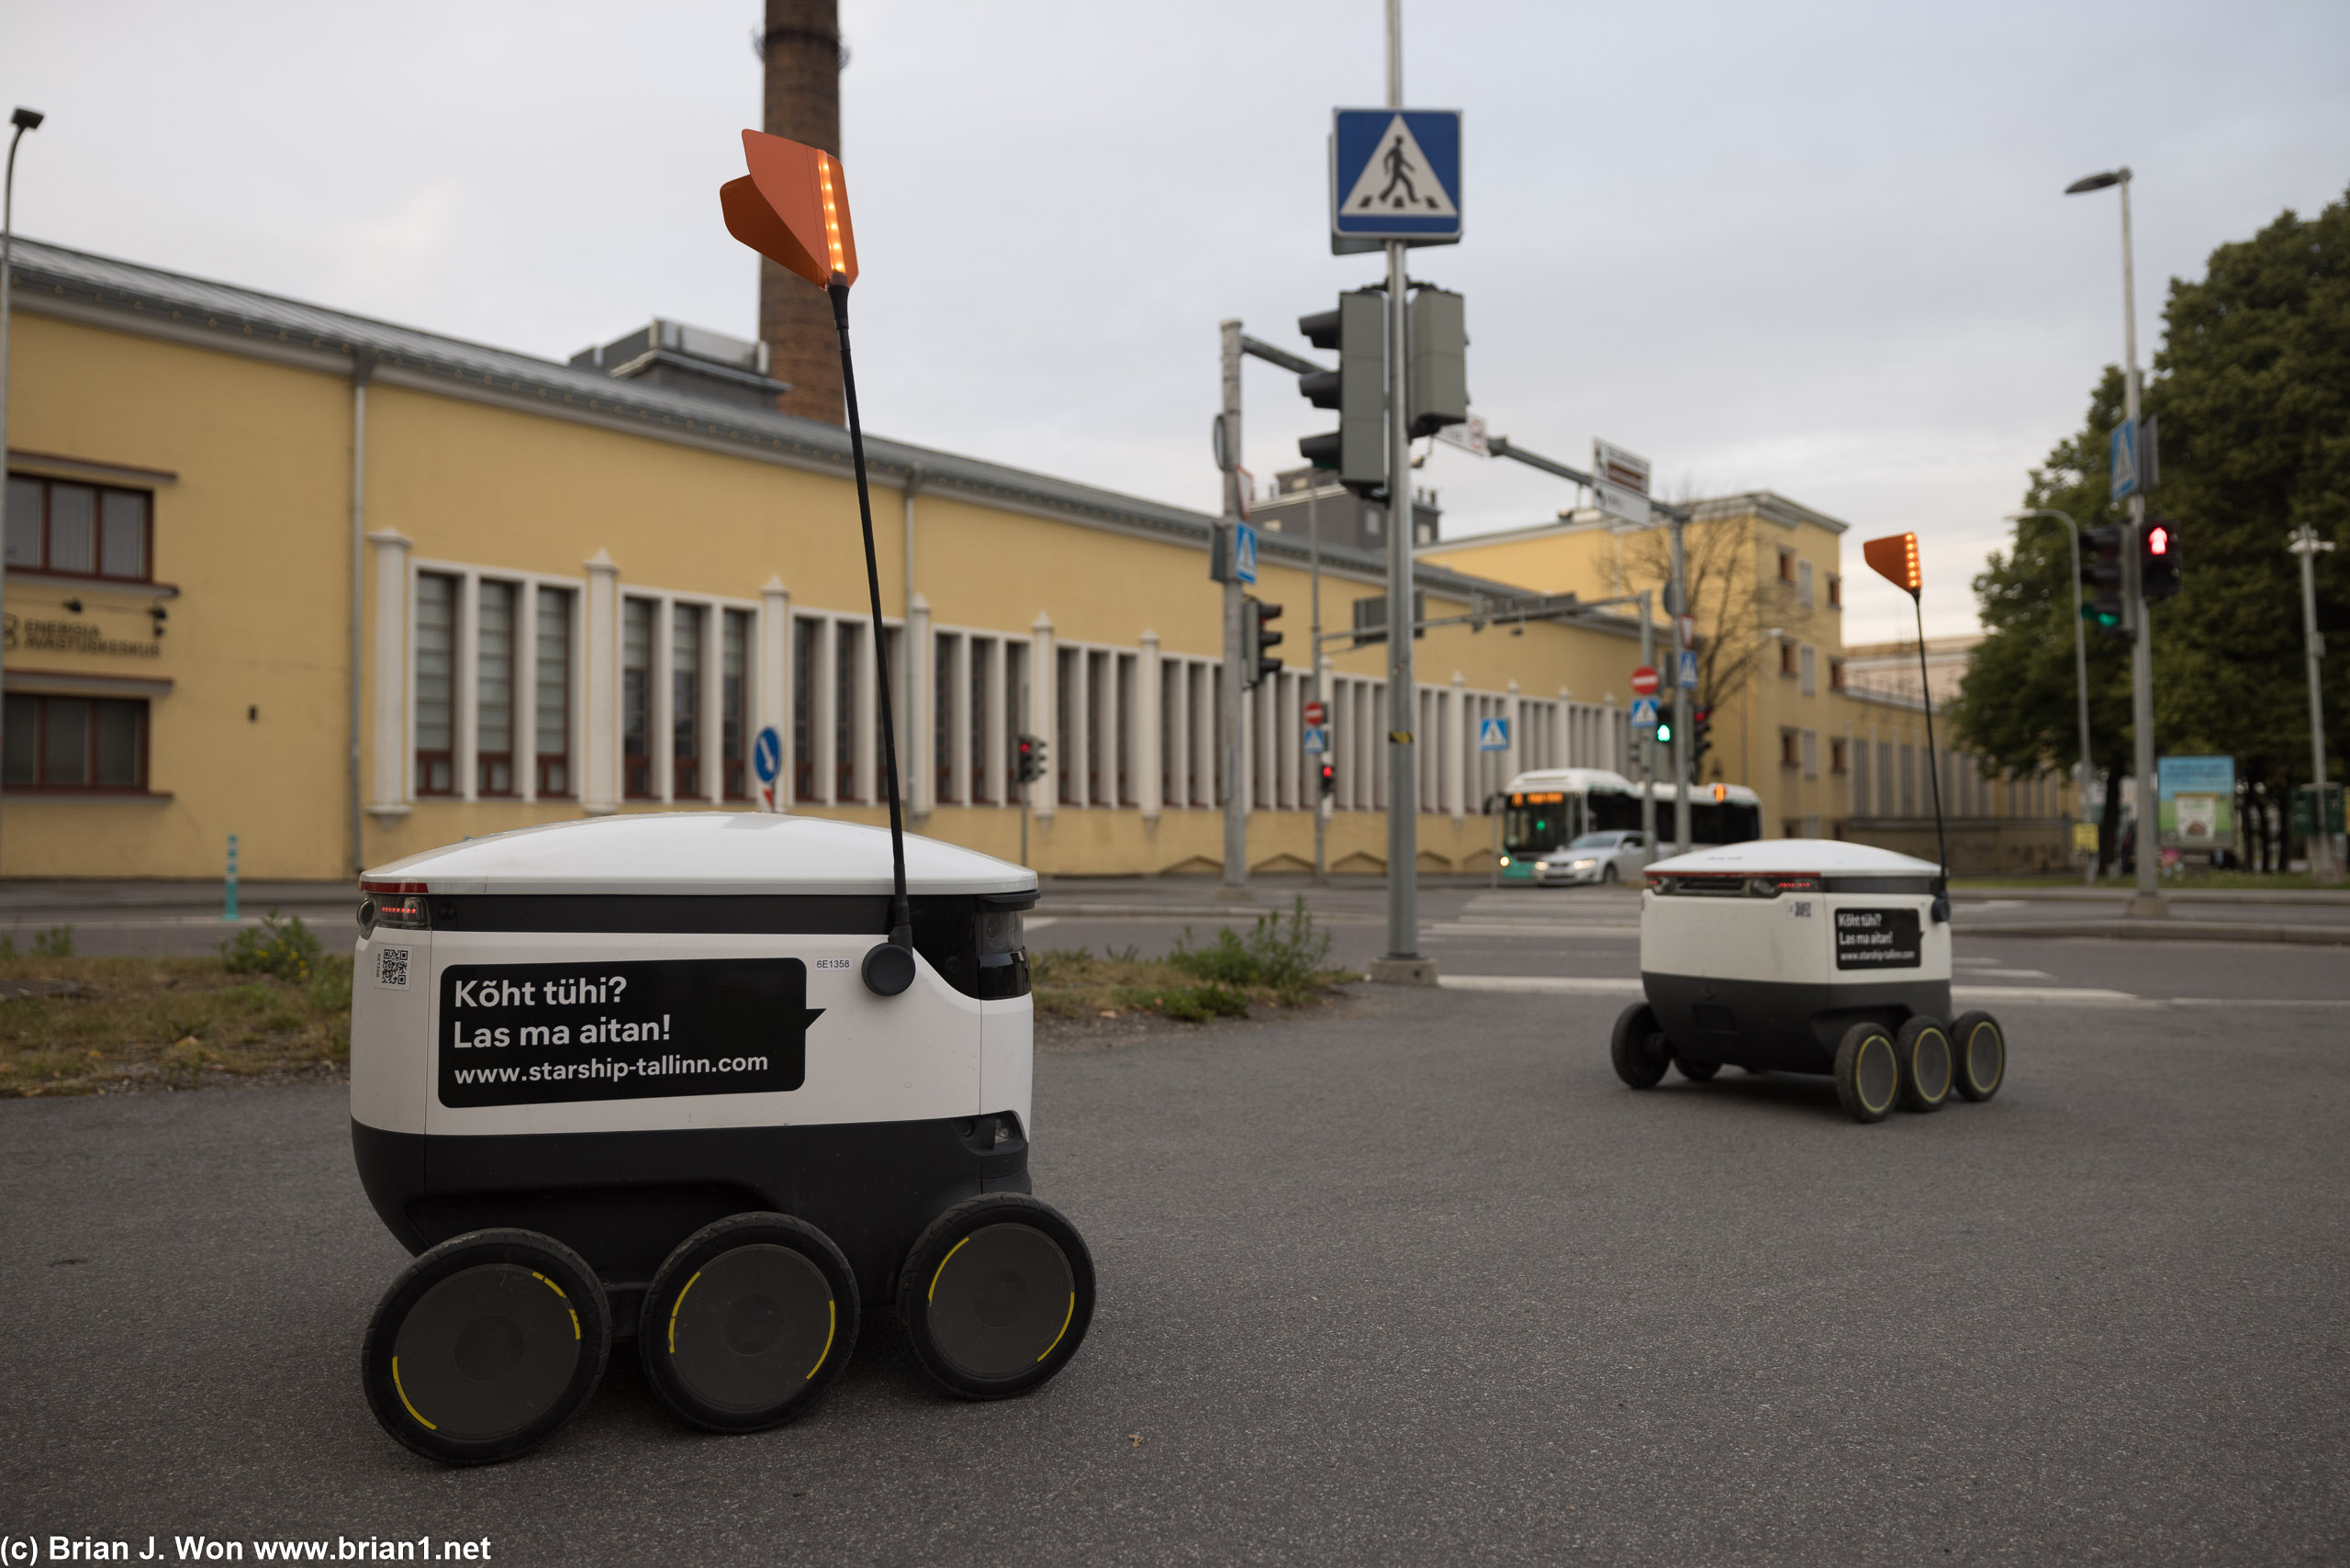 These food delivery robots look very familiar.